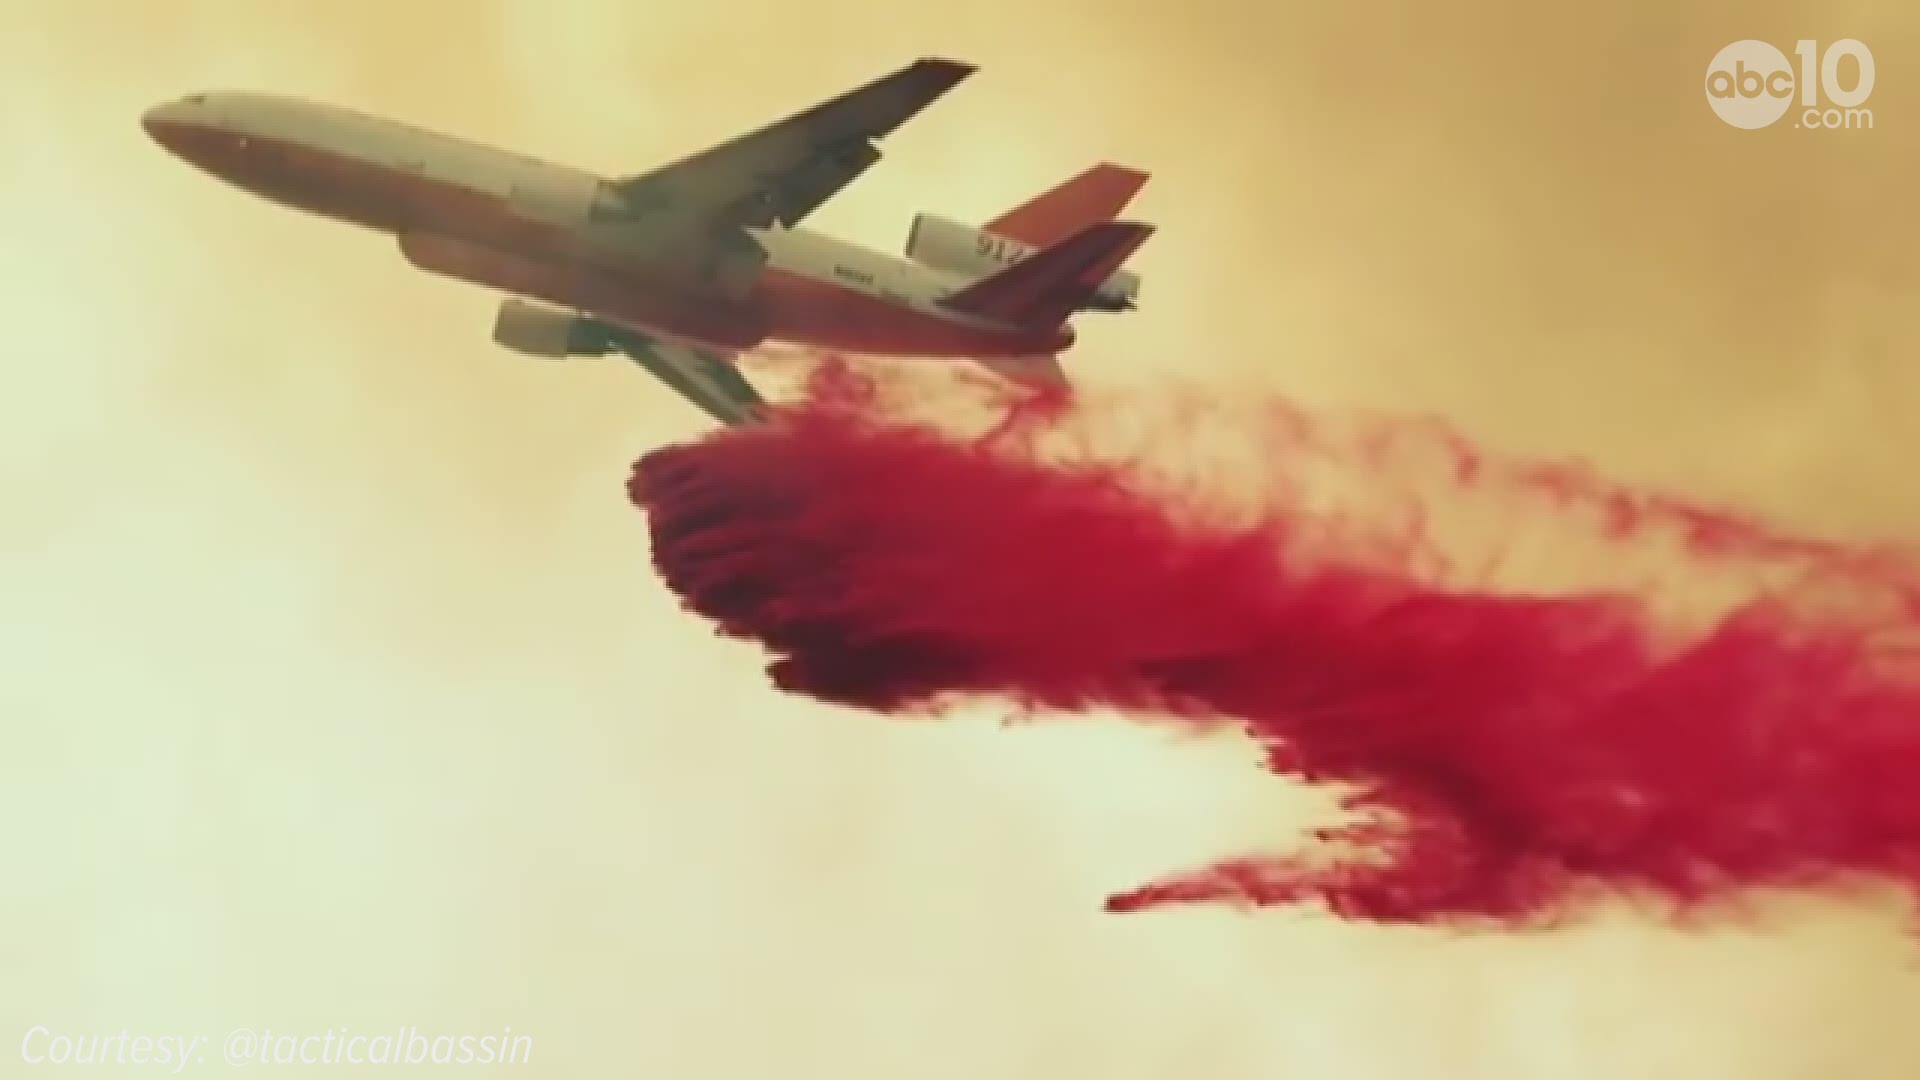 Mendocino Complex Fire: The video was just west of Lakeport on Monday afternoon as evacuation orders were in effect. (Video Courtesy: @tacticalbassin on Instagram)